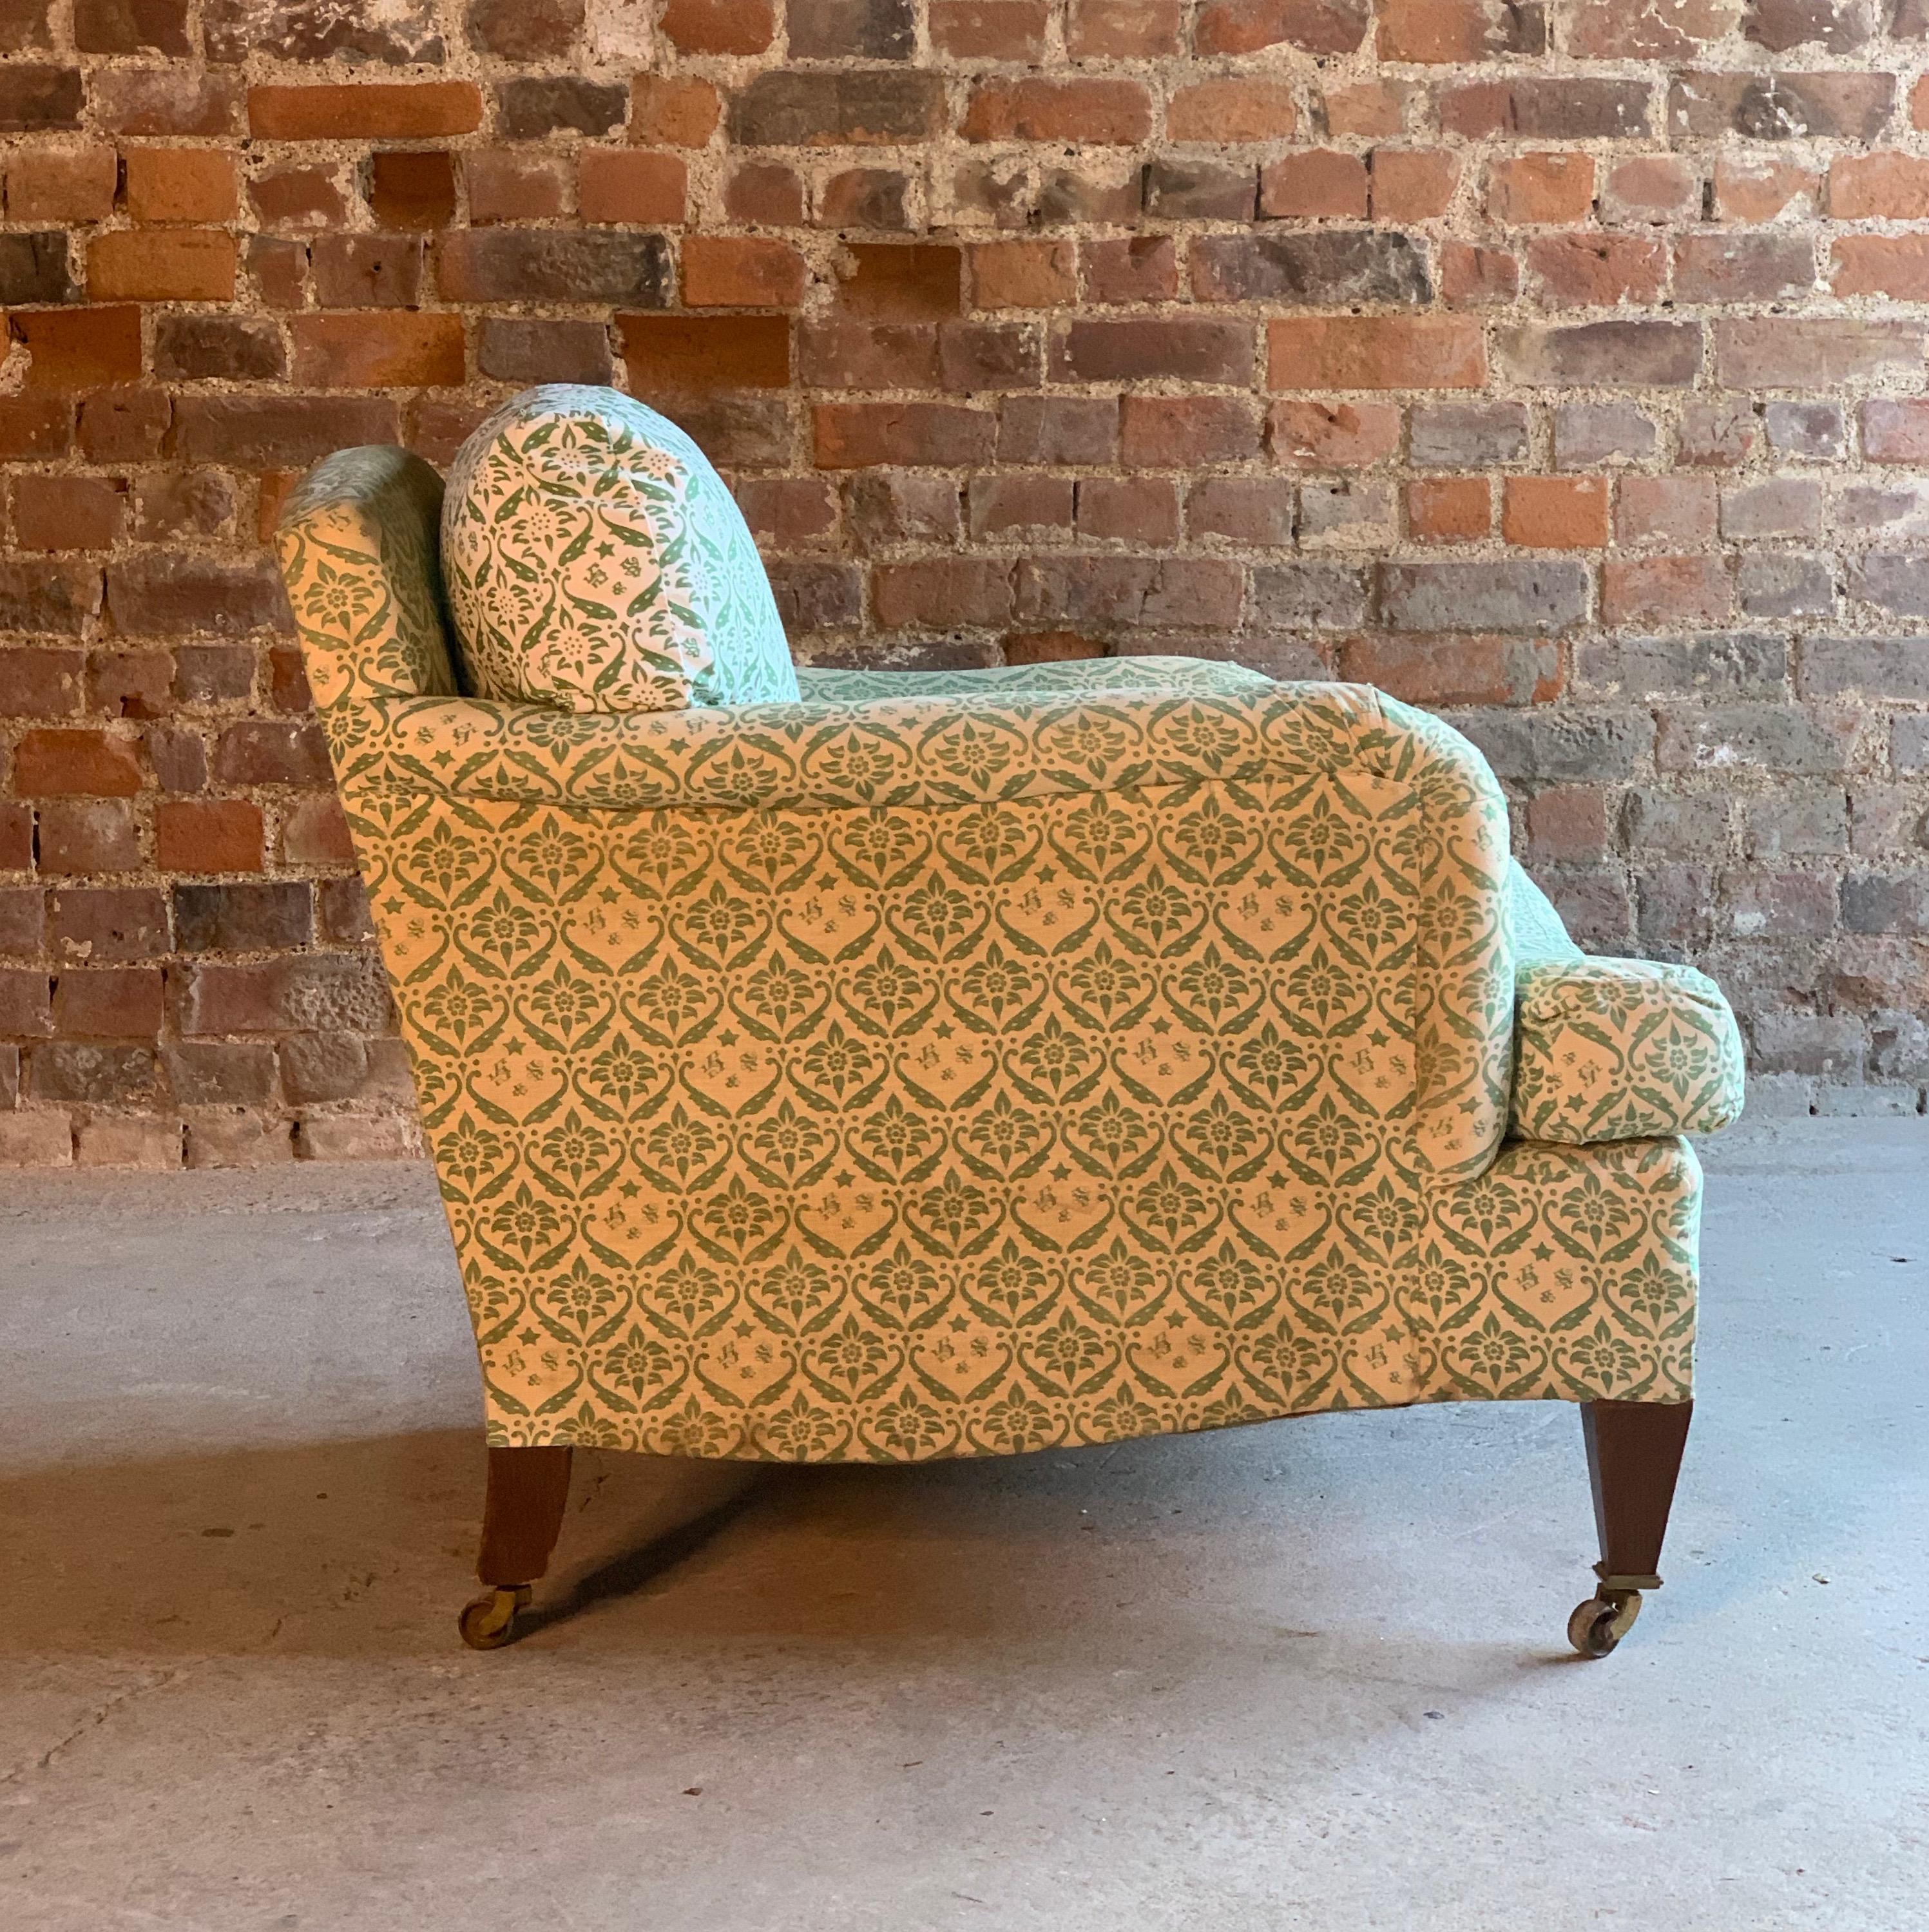 Howard & Sons Amazone Howard armchair by Lenygon & Morant, circa 1950

A wonderful small Amazone Howard armchair by Lenygon & Morant labelled to underside and stamped to rear leg Howard chairs limited, number 1583, raised on short tapered forelegs